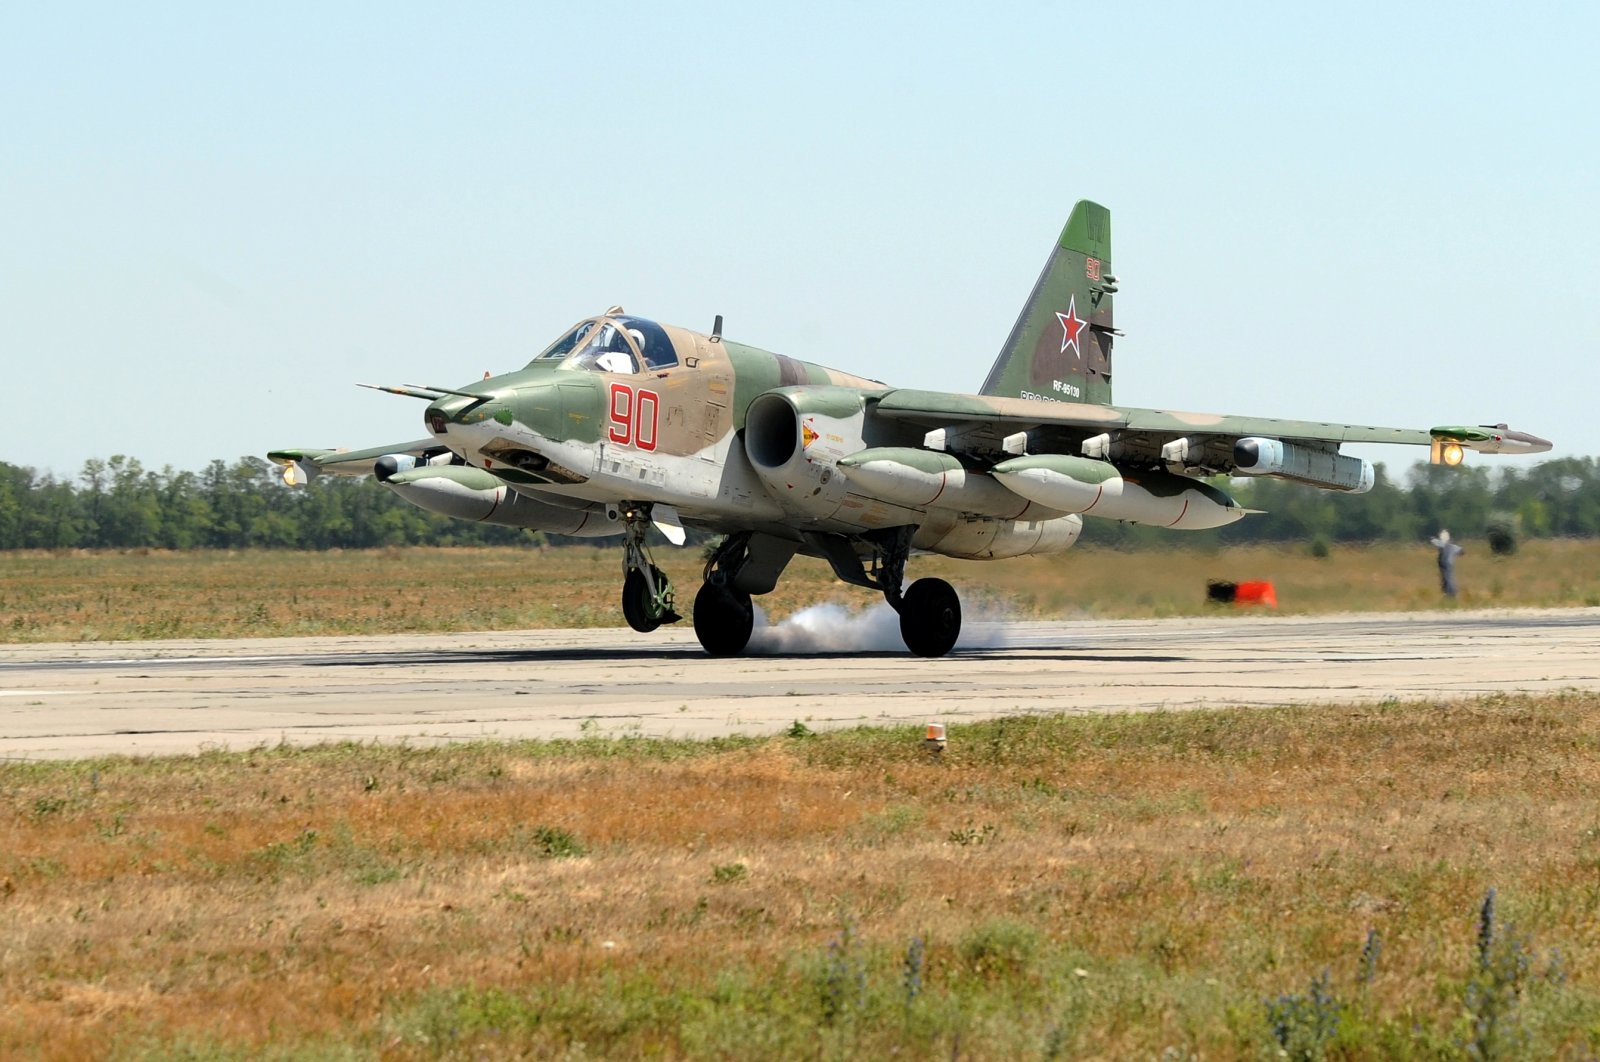 A Su-25 fighter jet, which took part in the Russian mission in Syria, lands at a military airport in Krasnodar Region, Russia July 4, 2018. (Reuters File Photo)